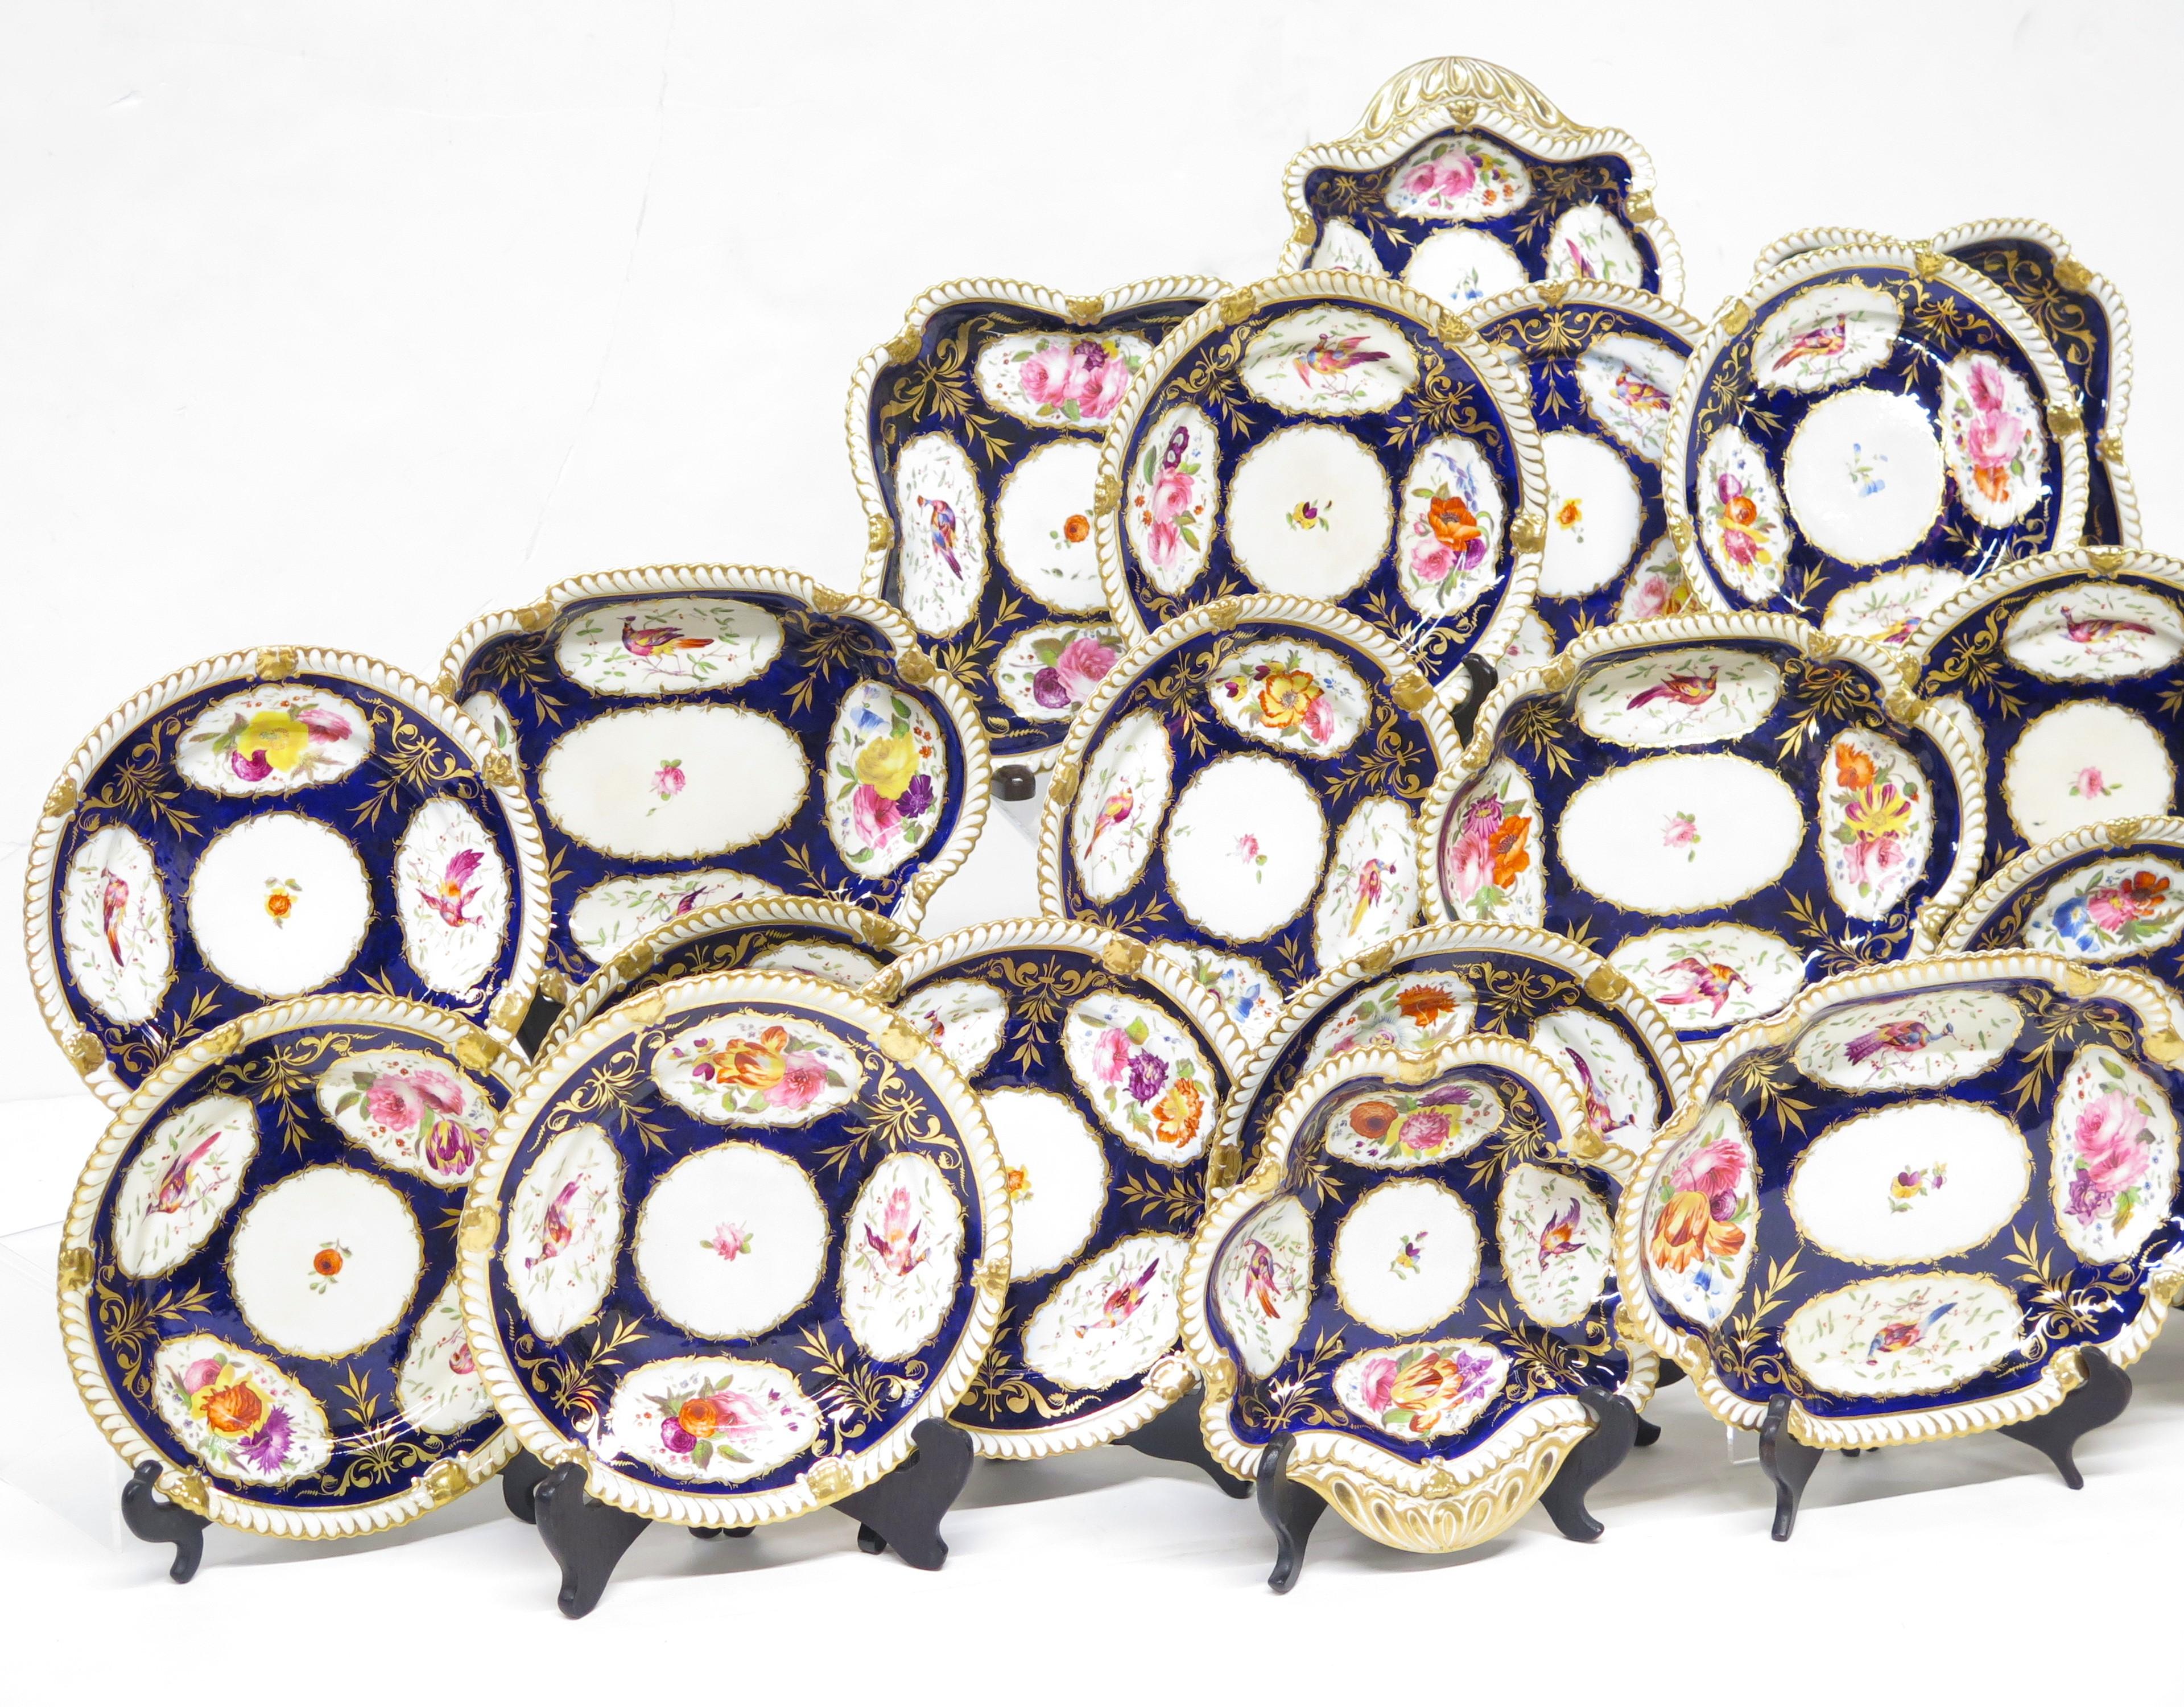 English A Group of Royal Crown Derby-Style Cobalt & Floral Hand-Painted China For Sale